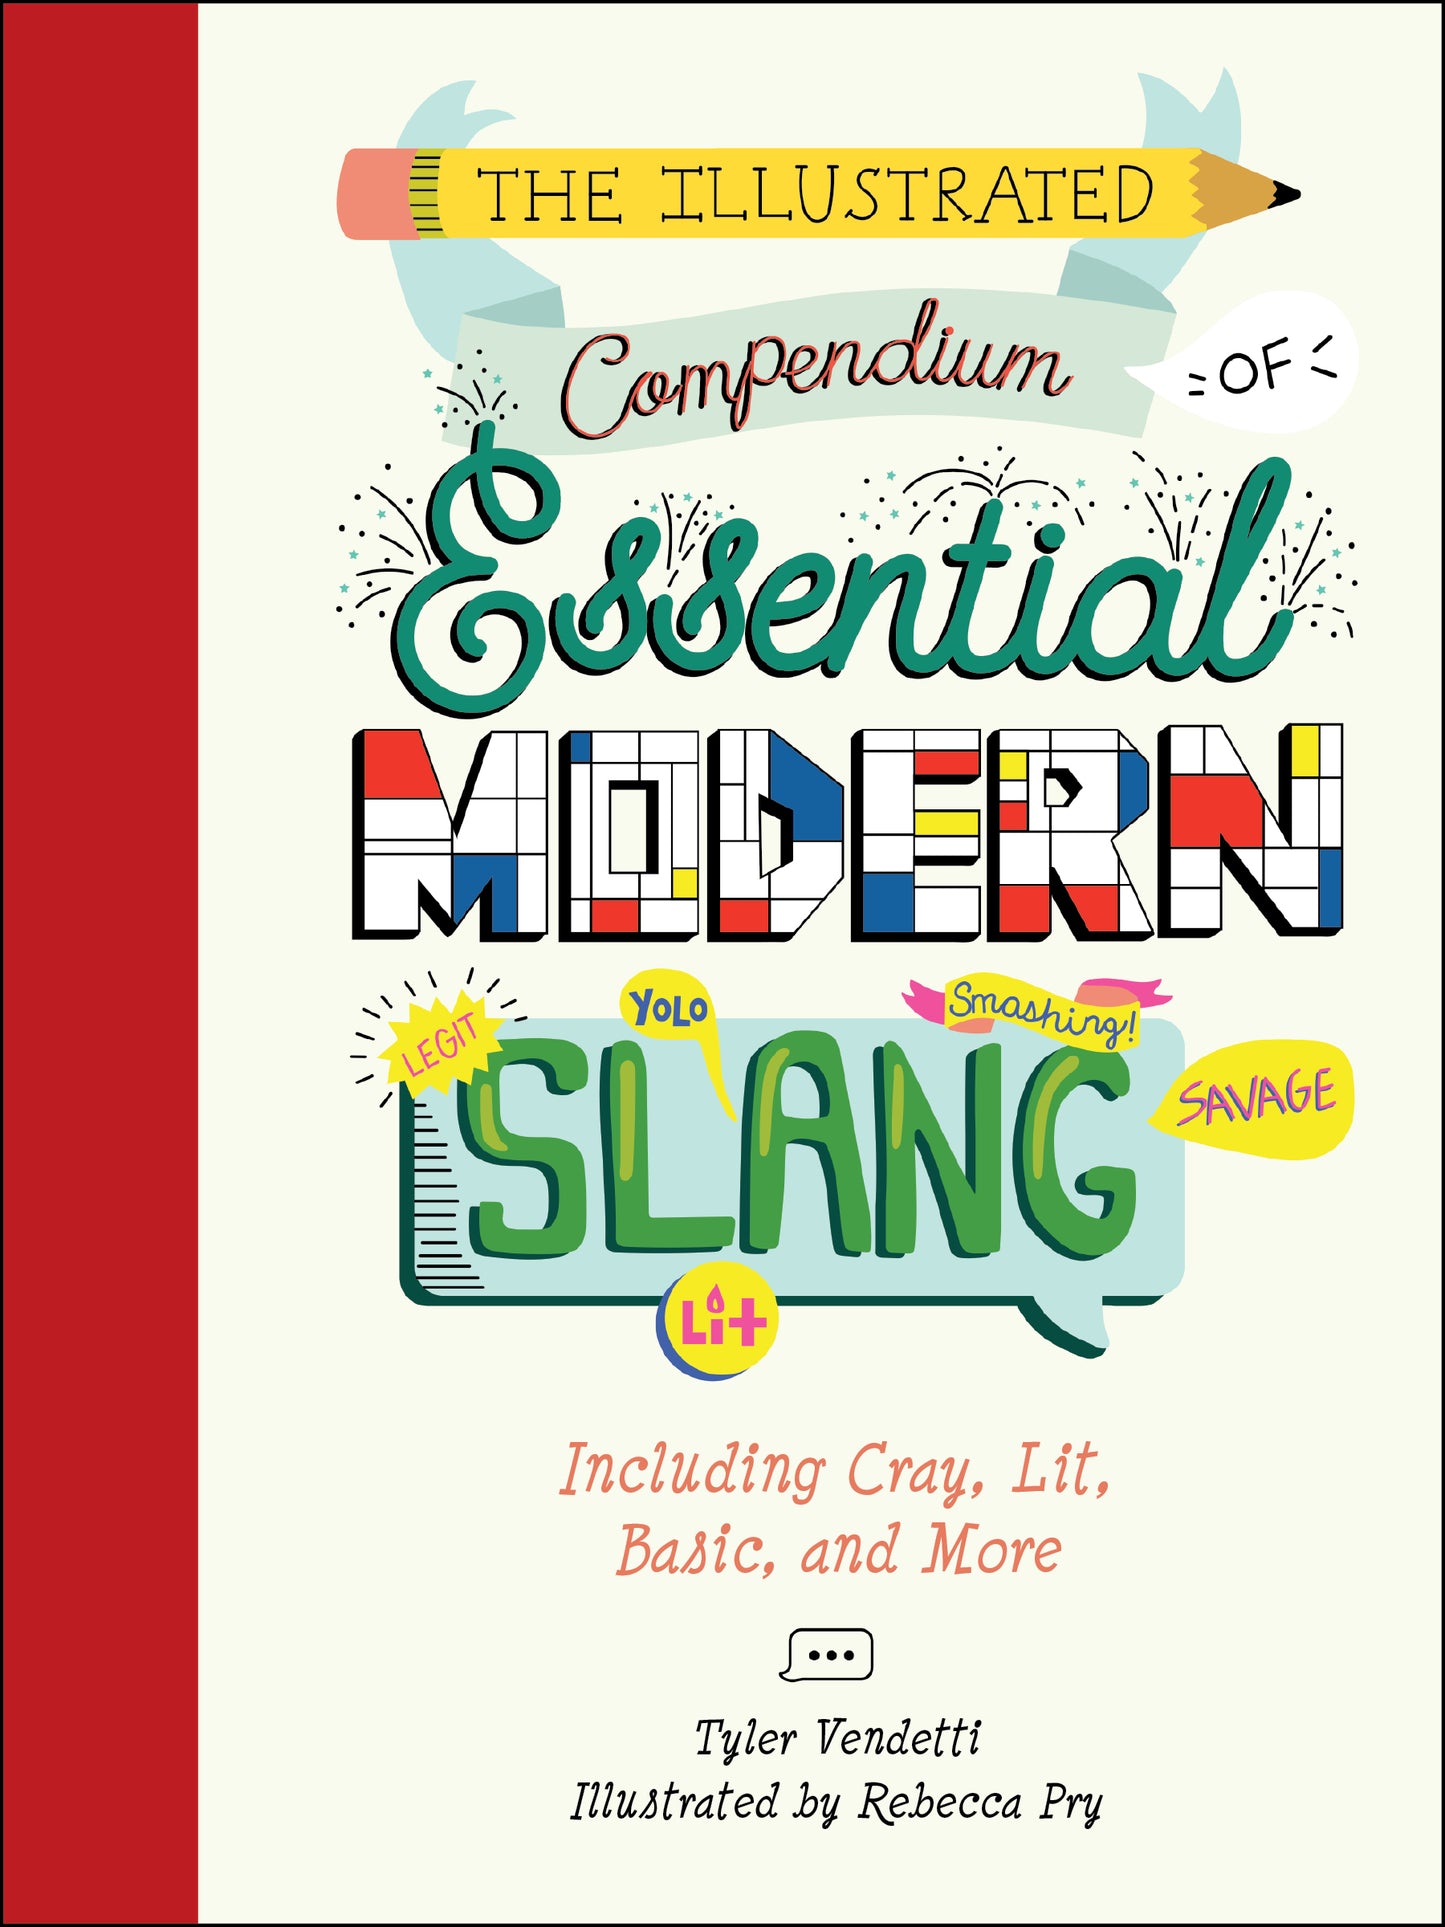 The Illustrated Compendium of Essential Modern Slang: Including Cray, Lit, Basic, and More